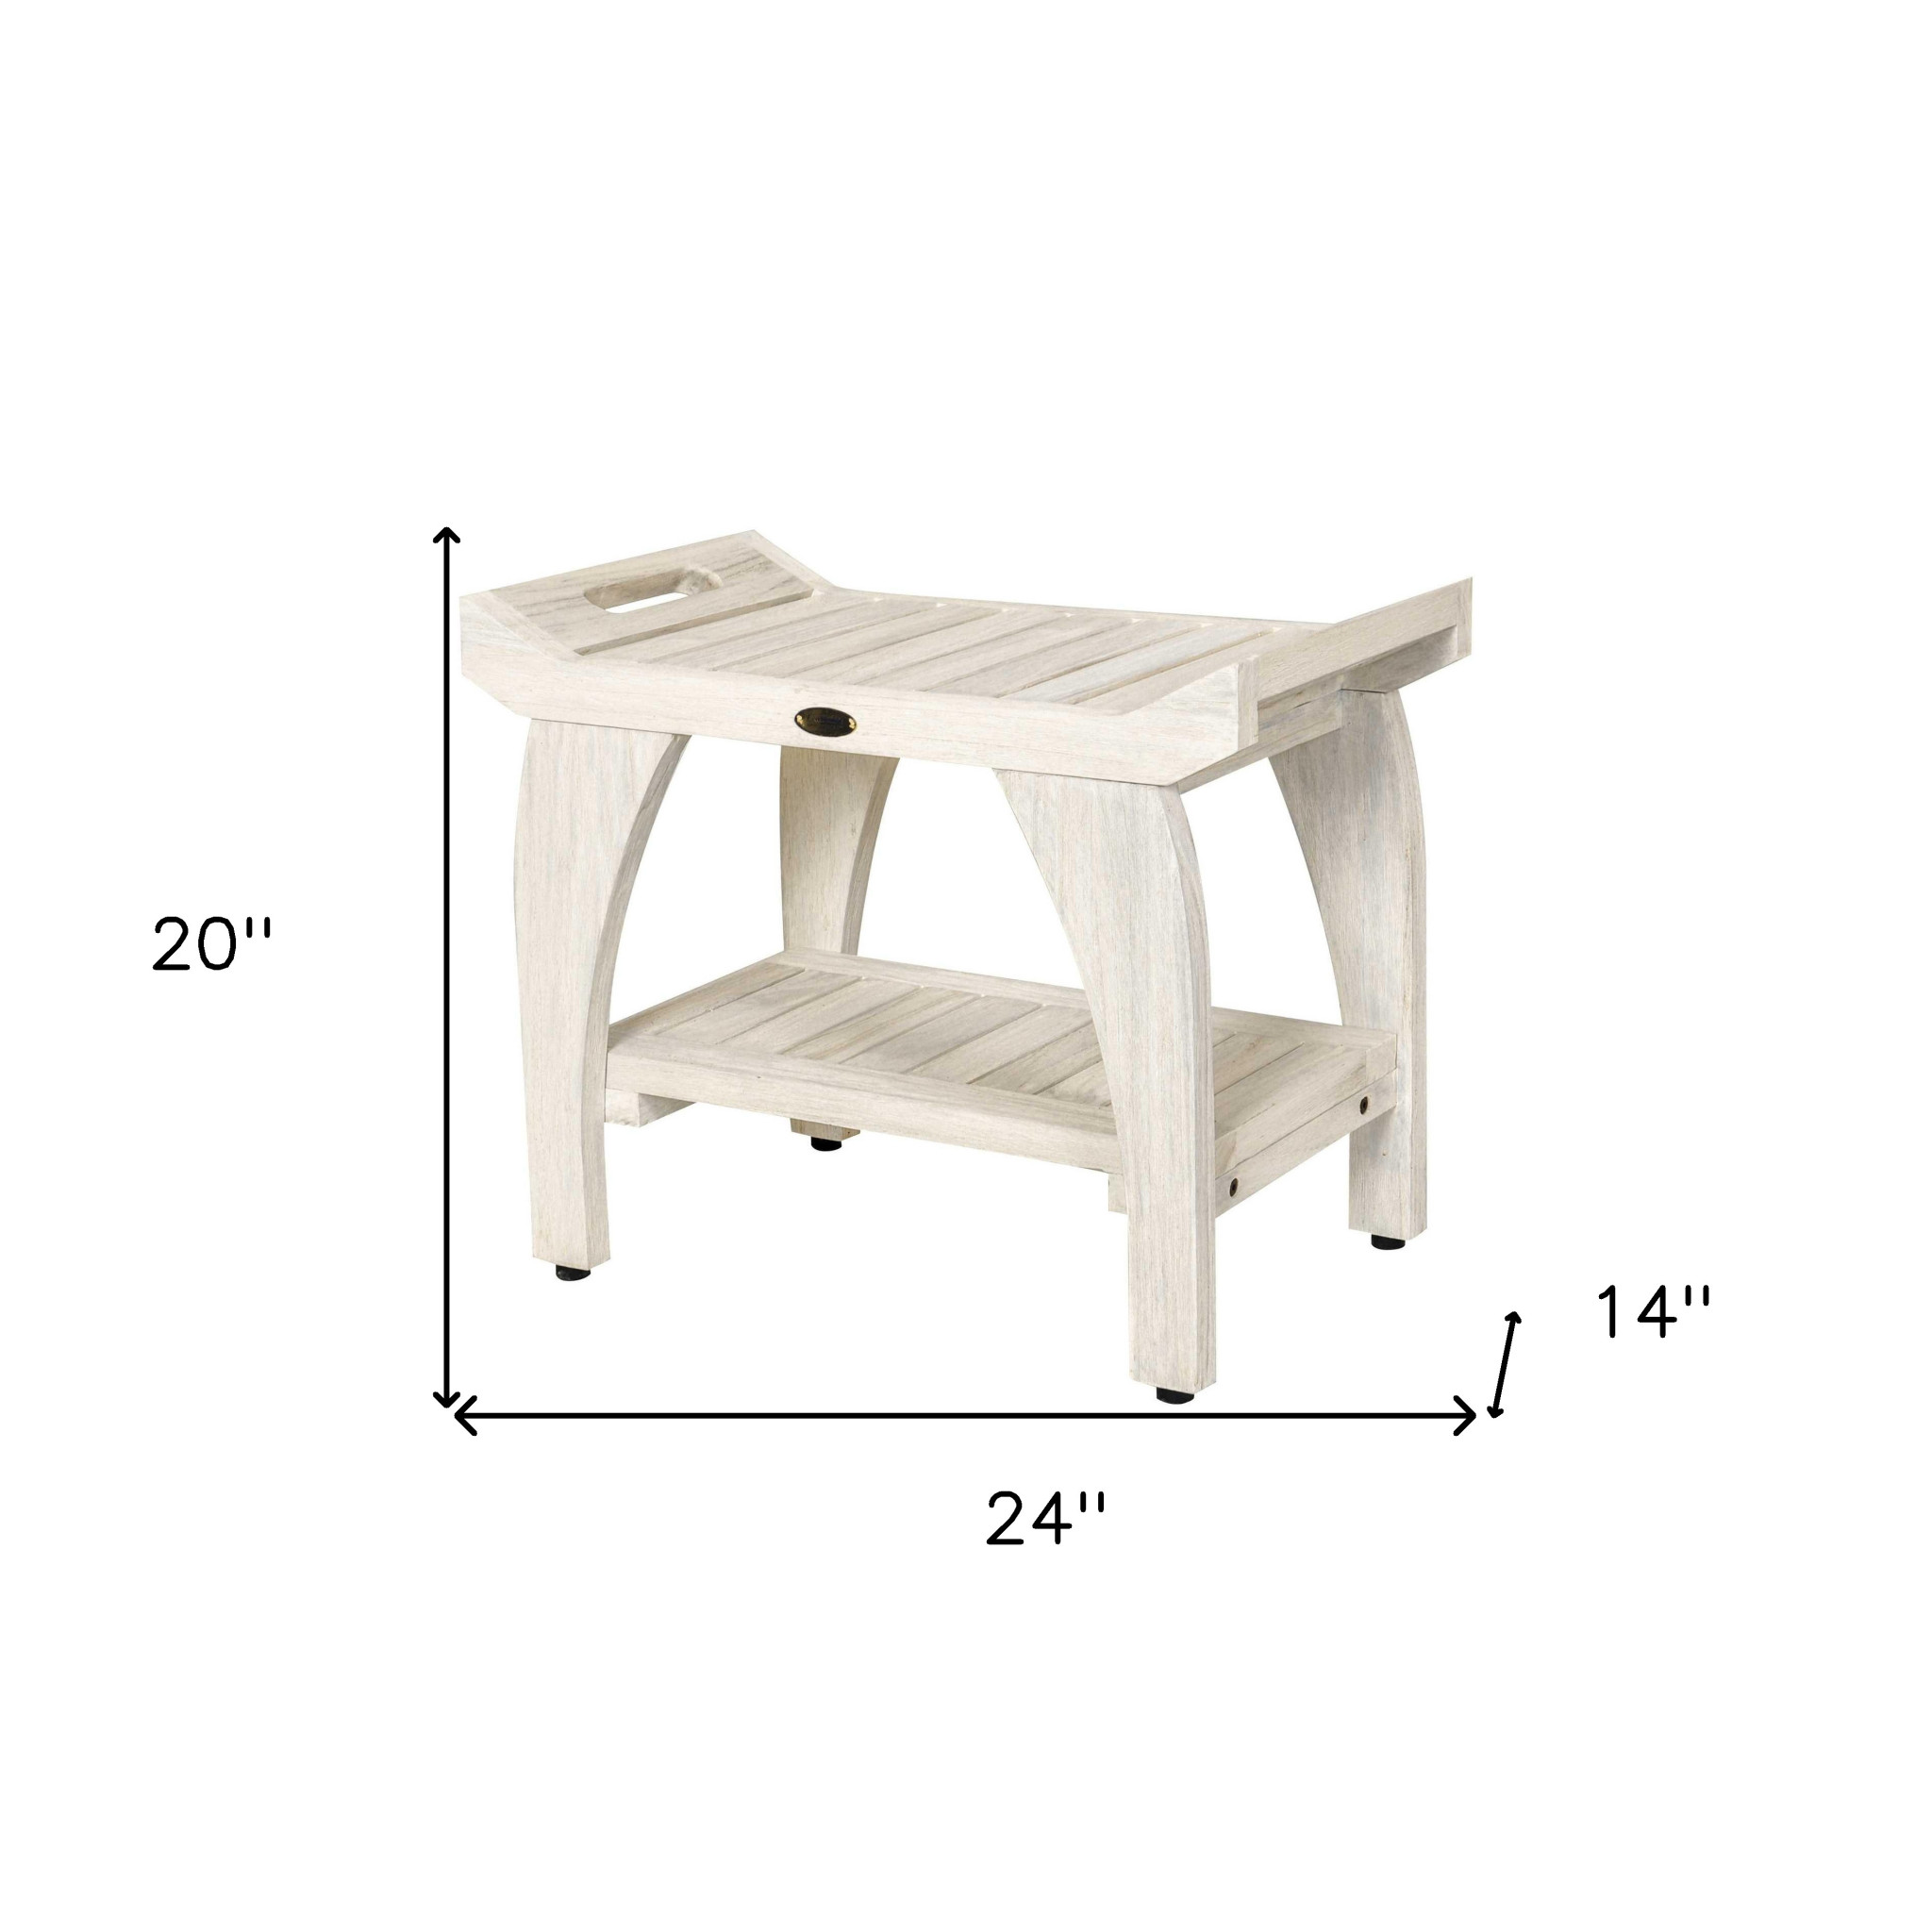 Compact Teak Shower Stool with Shelf and Handles in White Finish